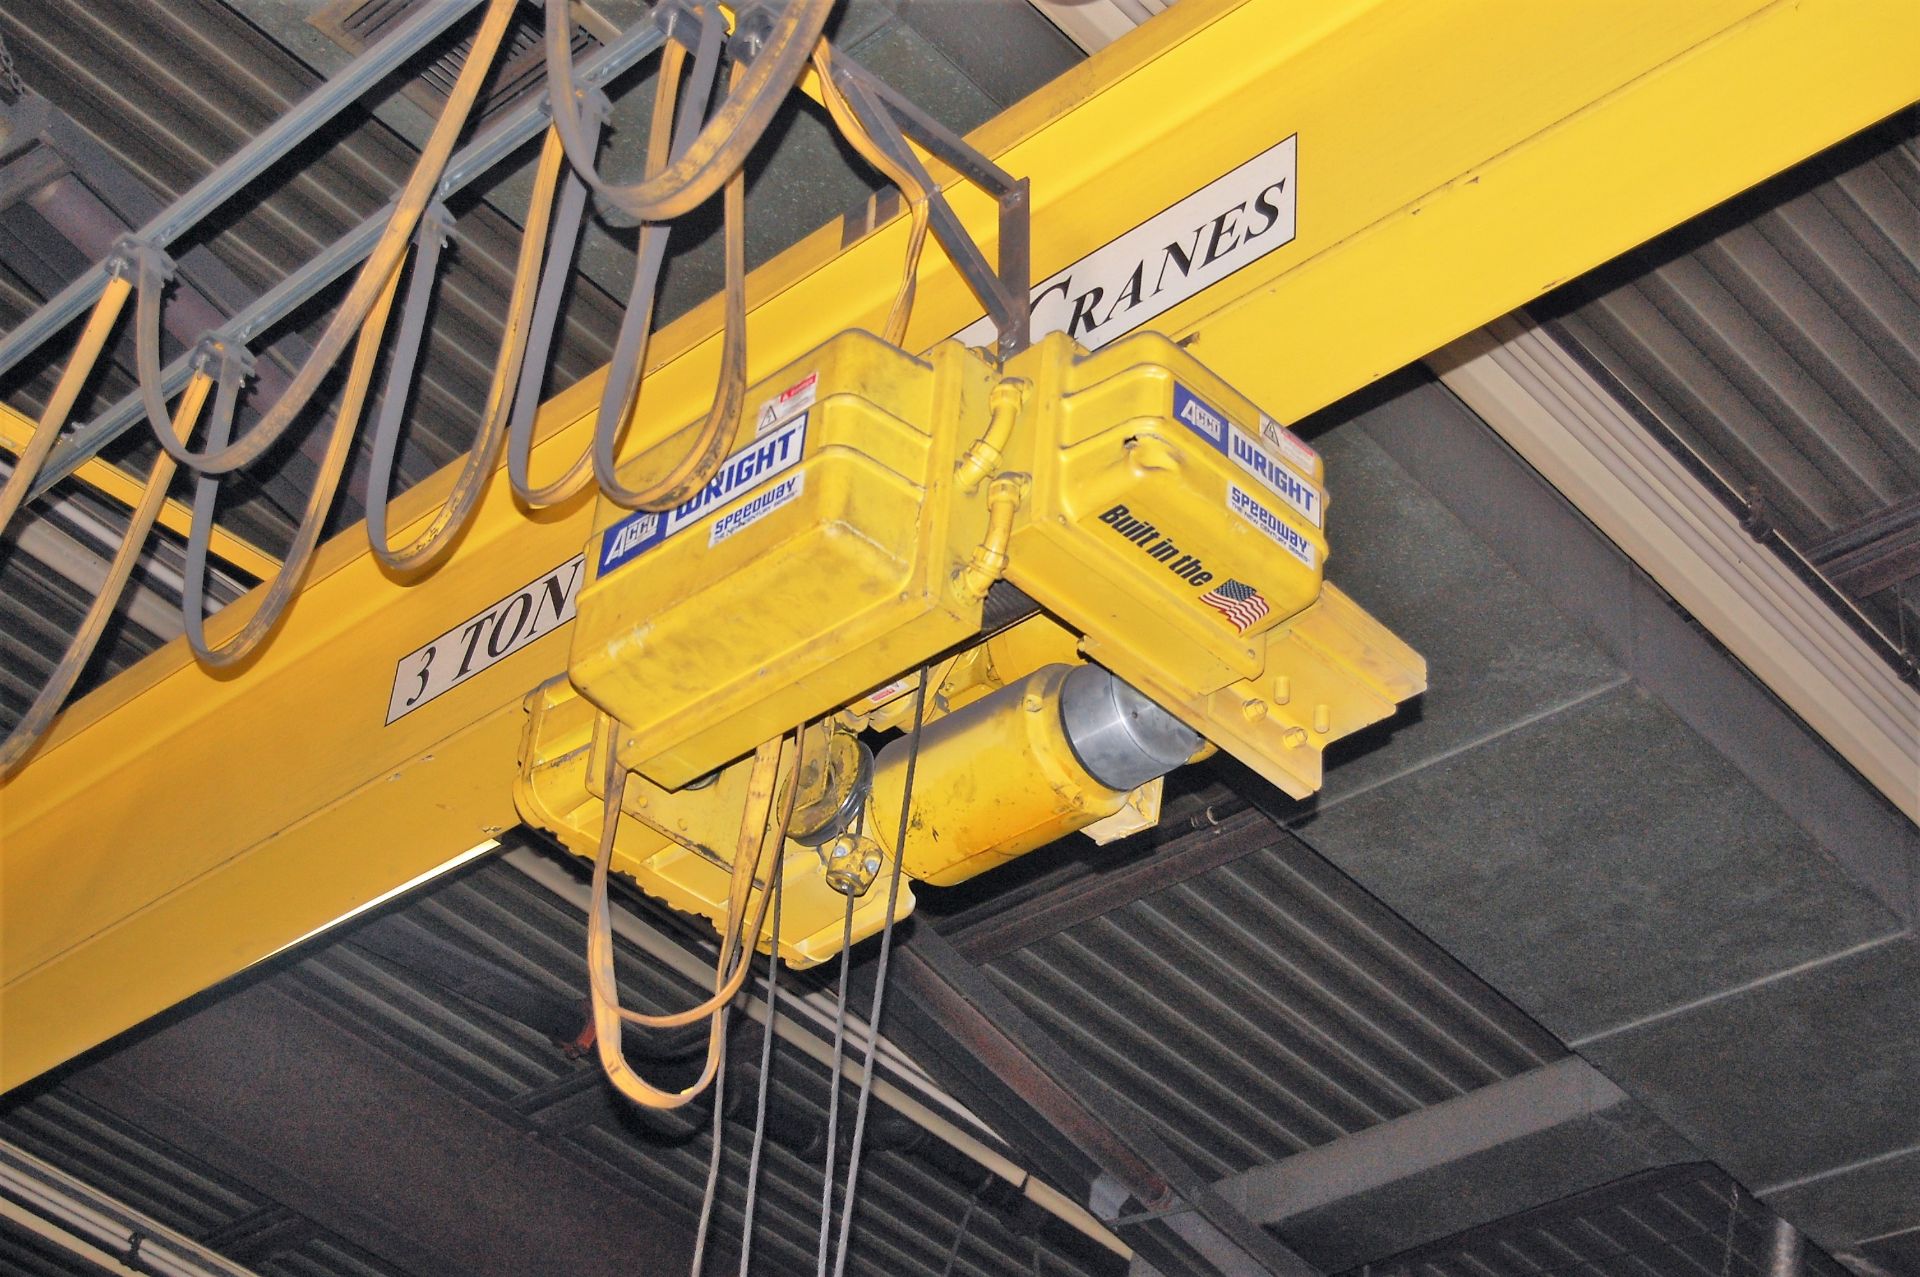 3 TON ACCO WRIGHT "SPEEDWAY" OVERHEAD BRIDGE CRANE, TOP RUNNING, SINGLE GIRDER, WITH APPROXIMATELY - Image 6 of 11